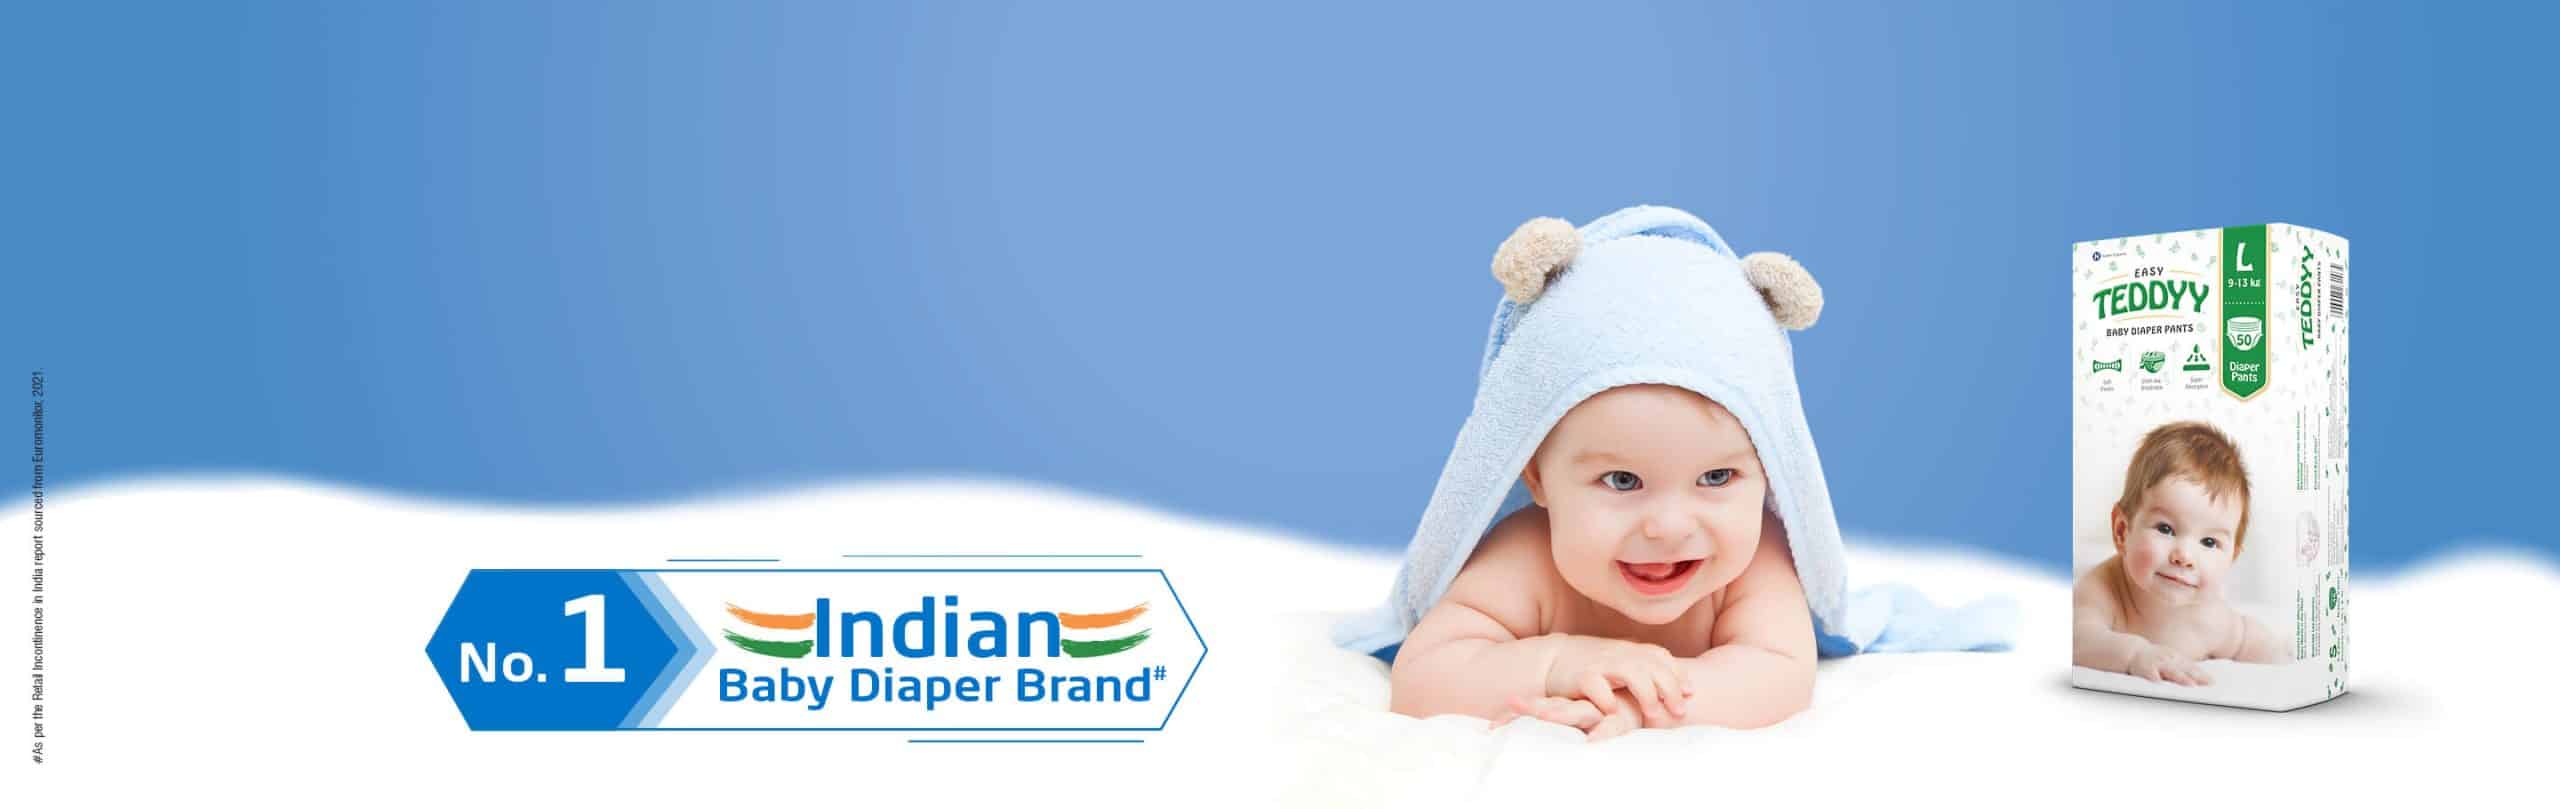 Indian No. 1 Baby Diaper Brand